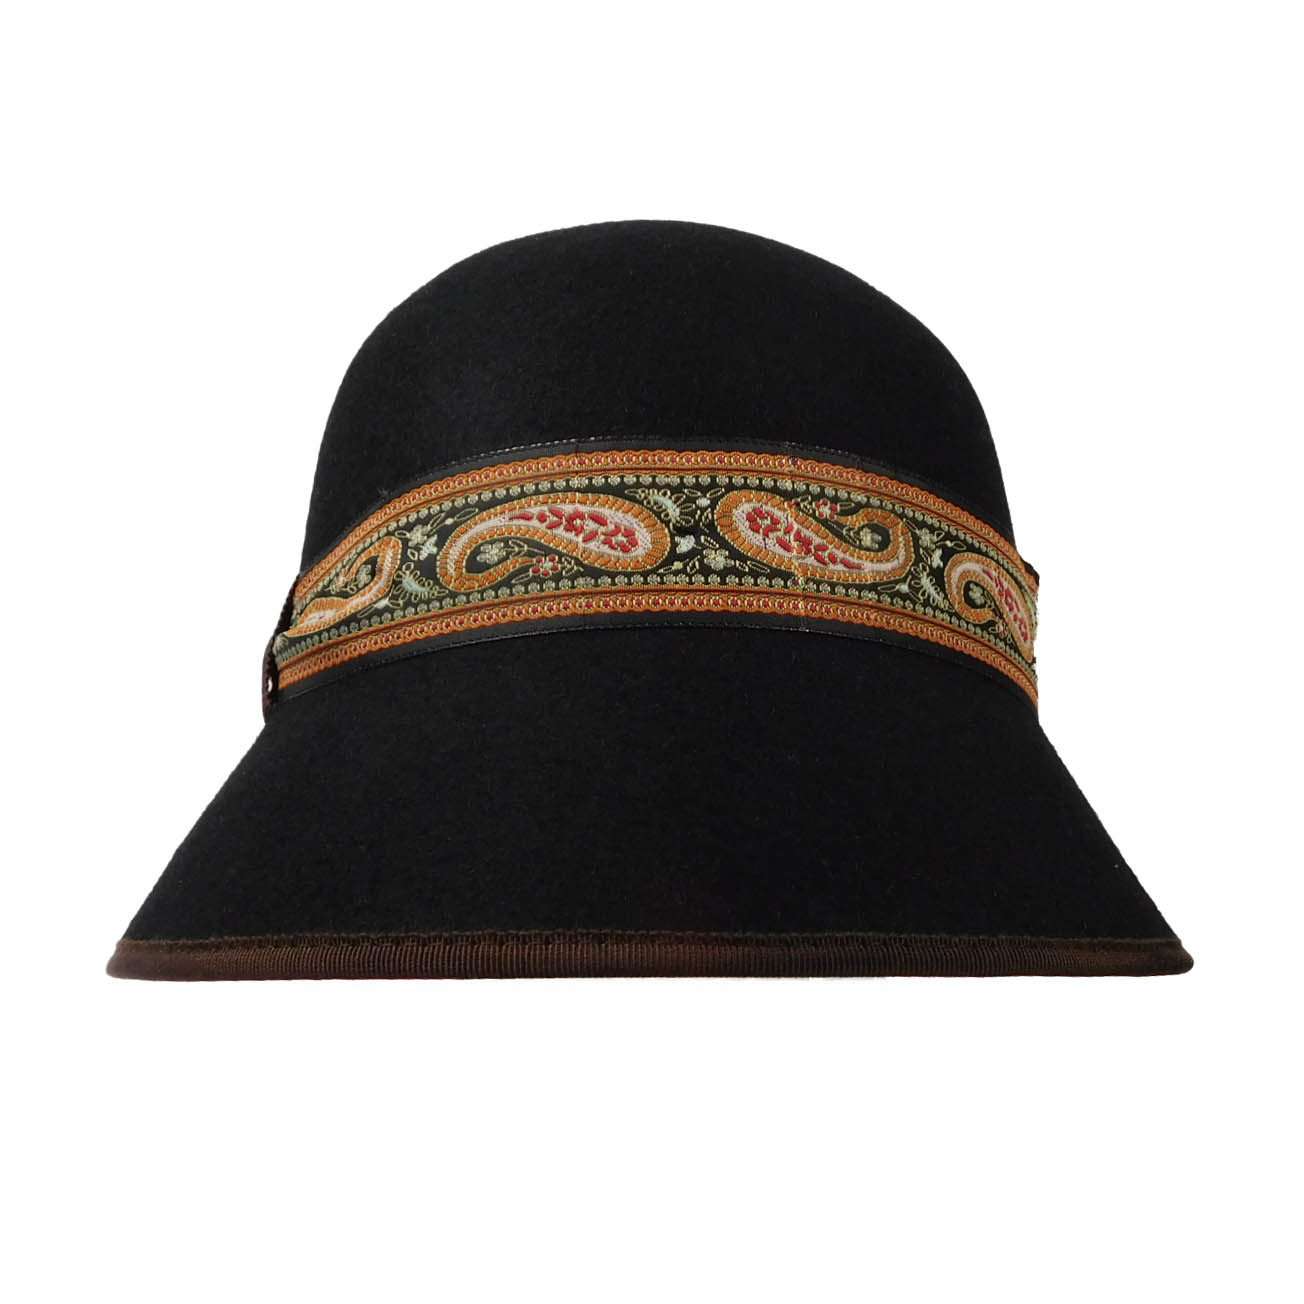 Black Wool Cloche with Paisley Band Cloche Jeanne Simmons    